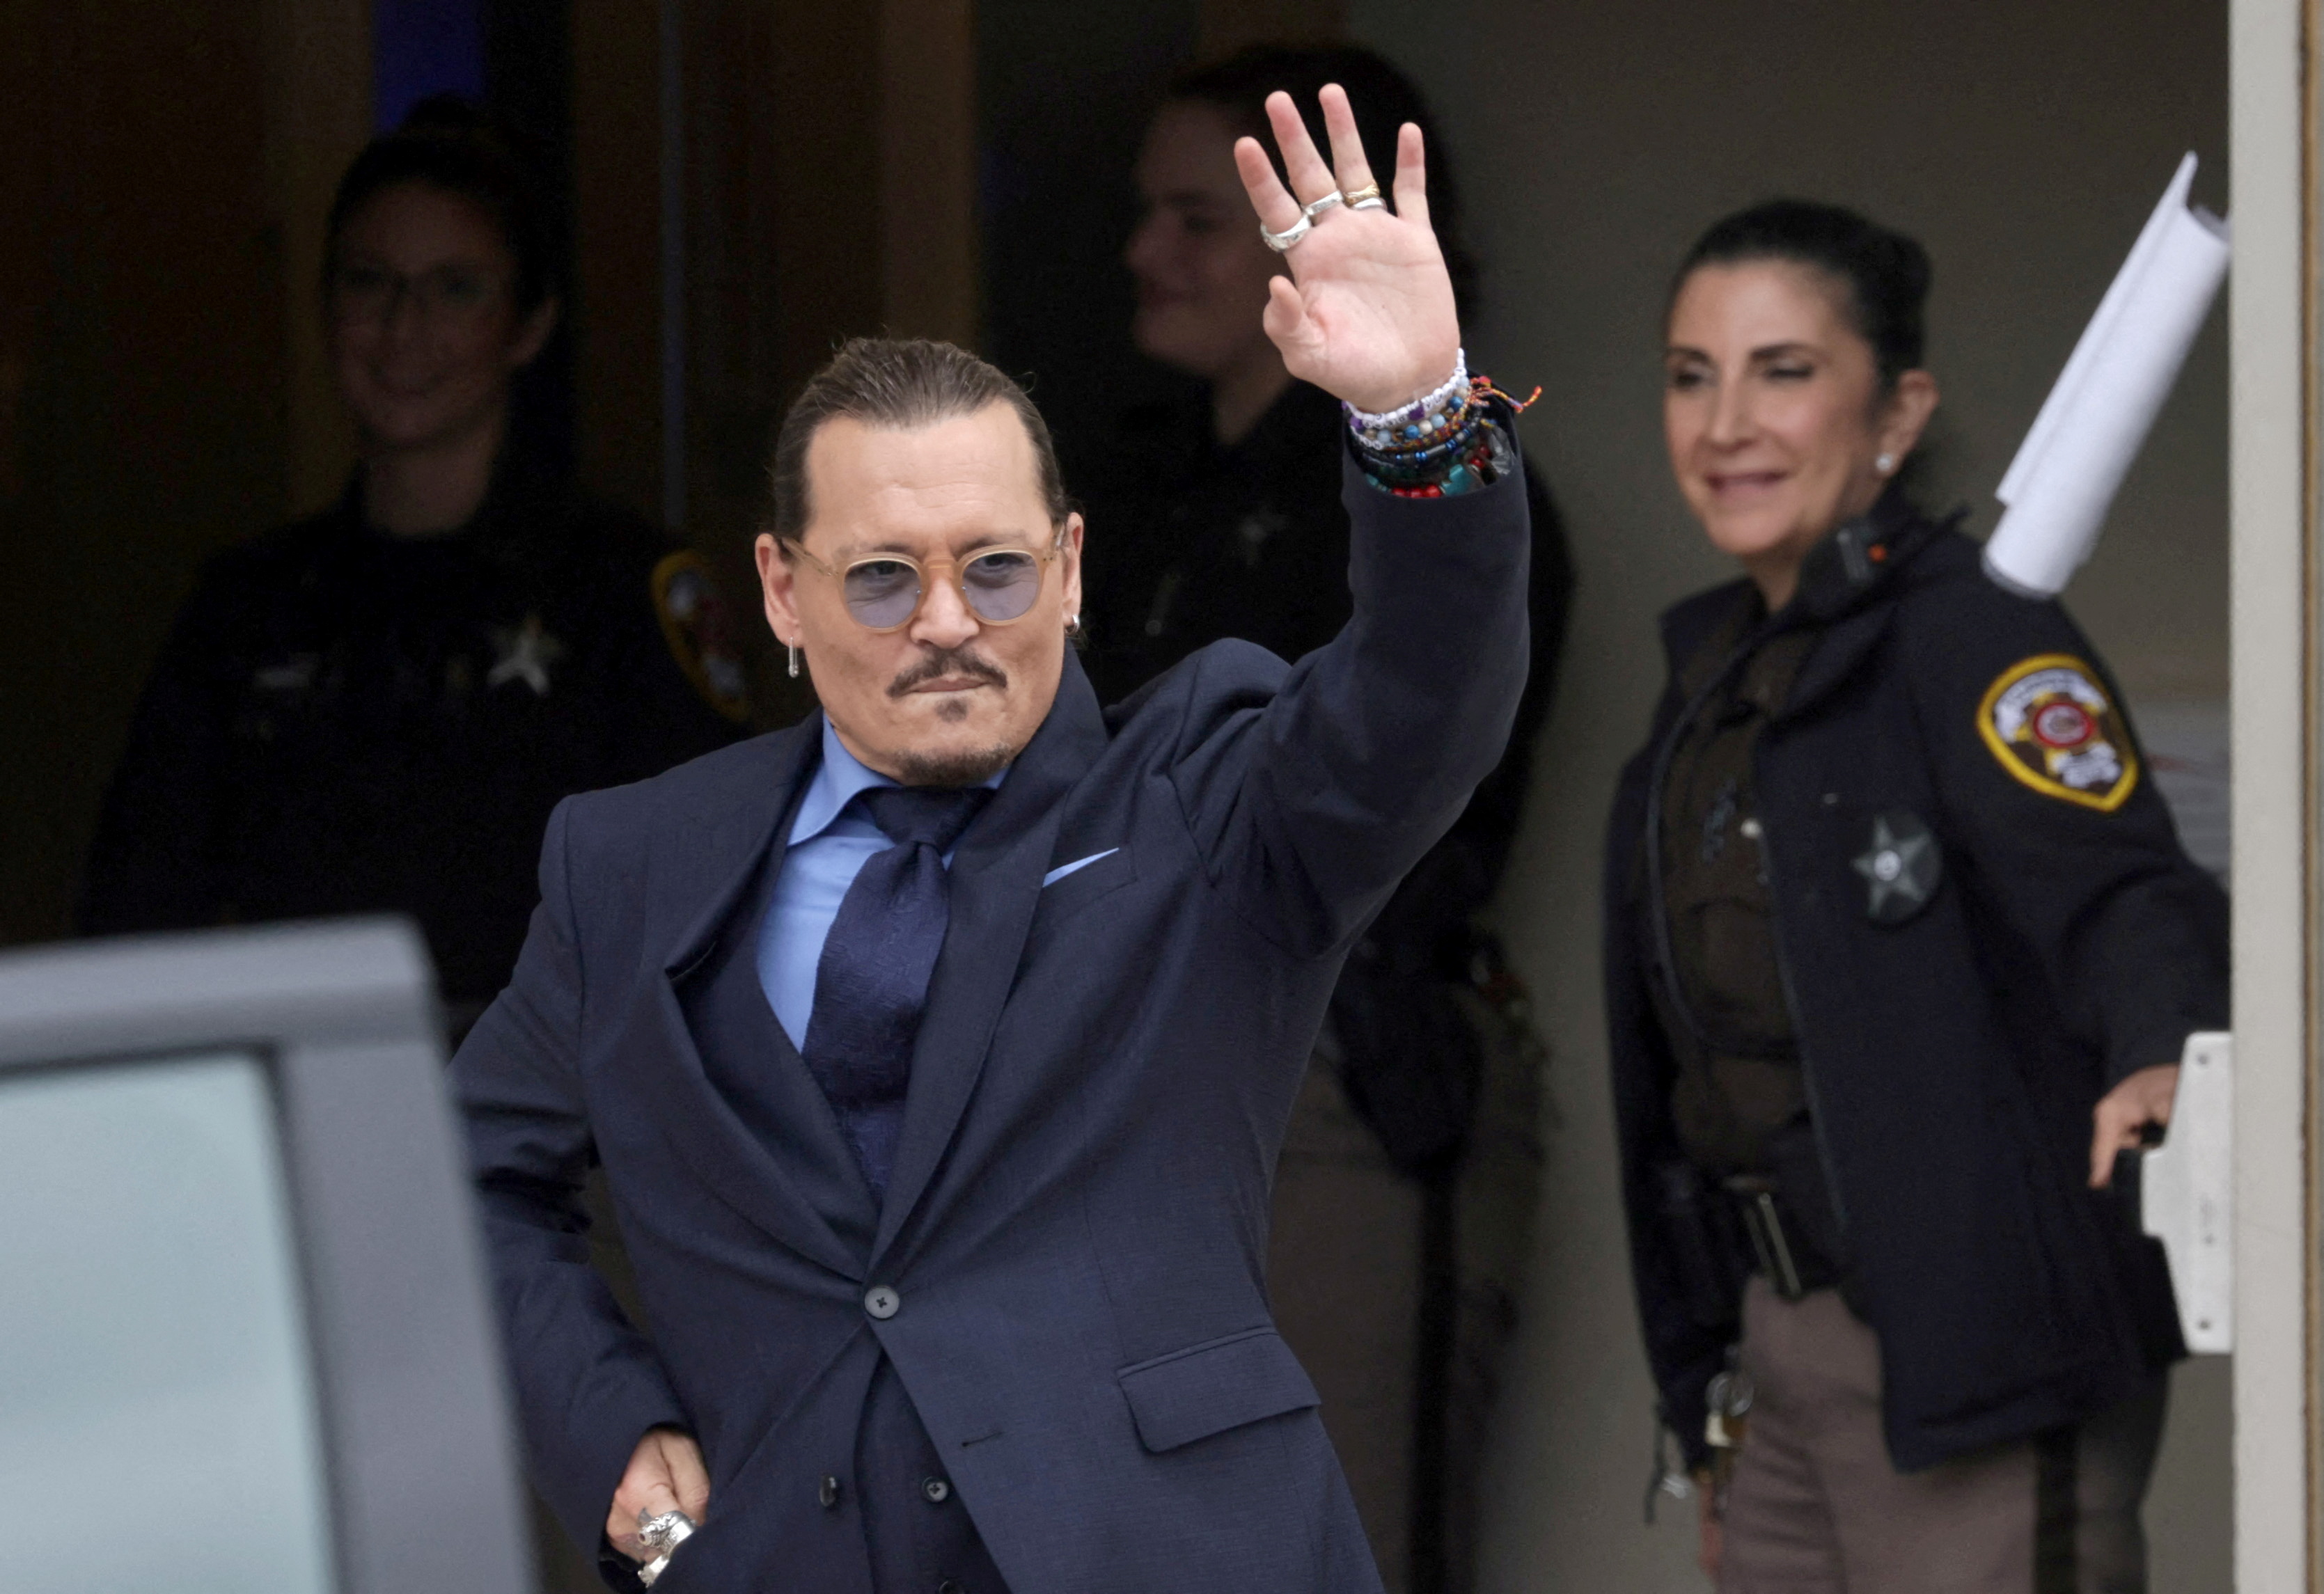 File photo: Johnny Depp greets his fans as he leaves court after a hearing in the libel trial against his ex-wife Amber Heard on May 27, 2022 (REUTERS / Evelyn Hockstein)